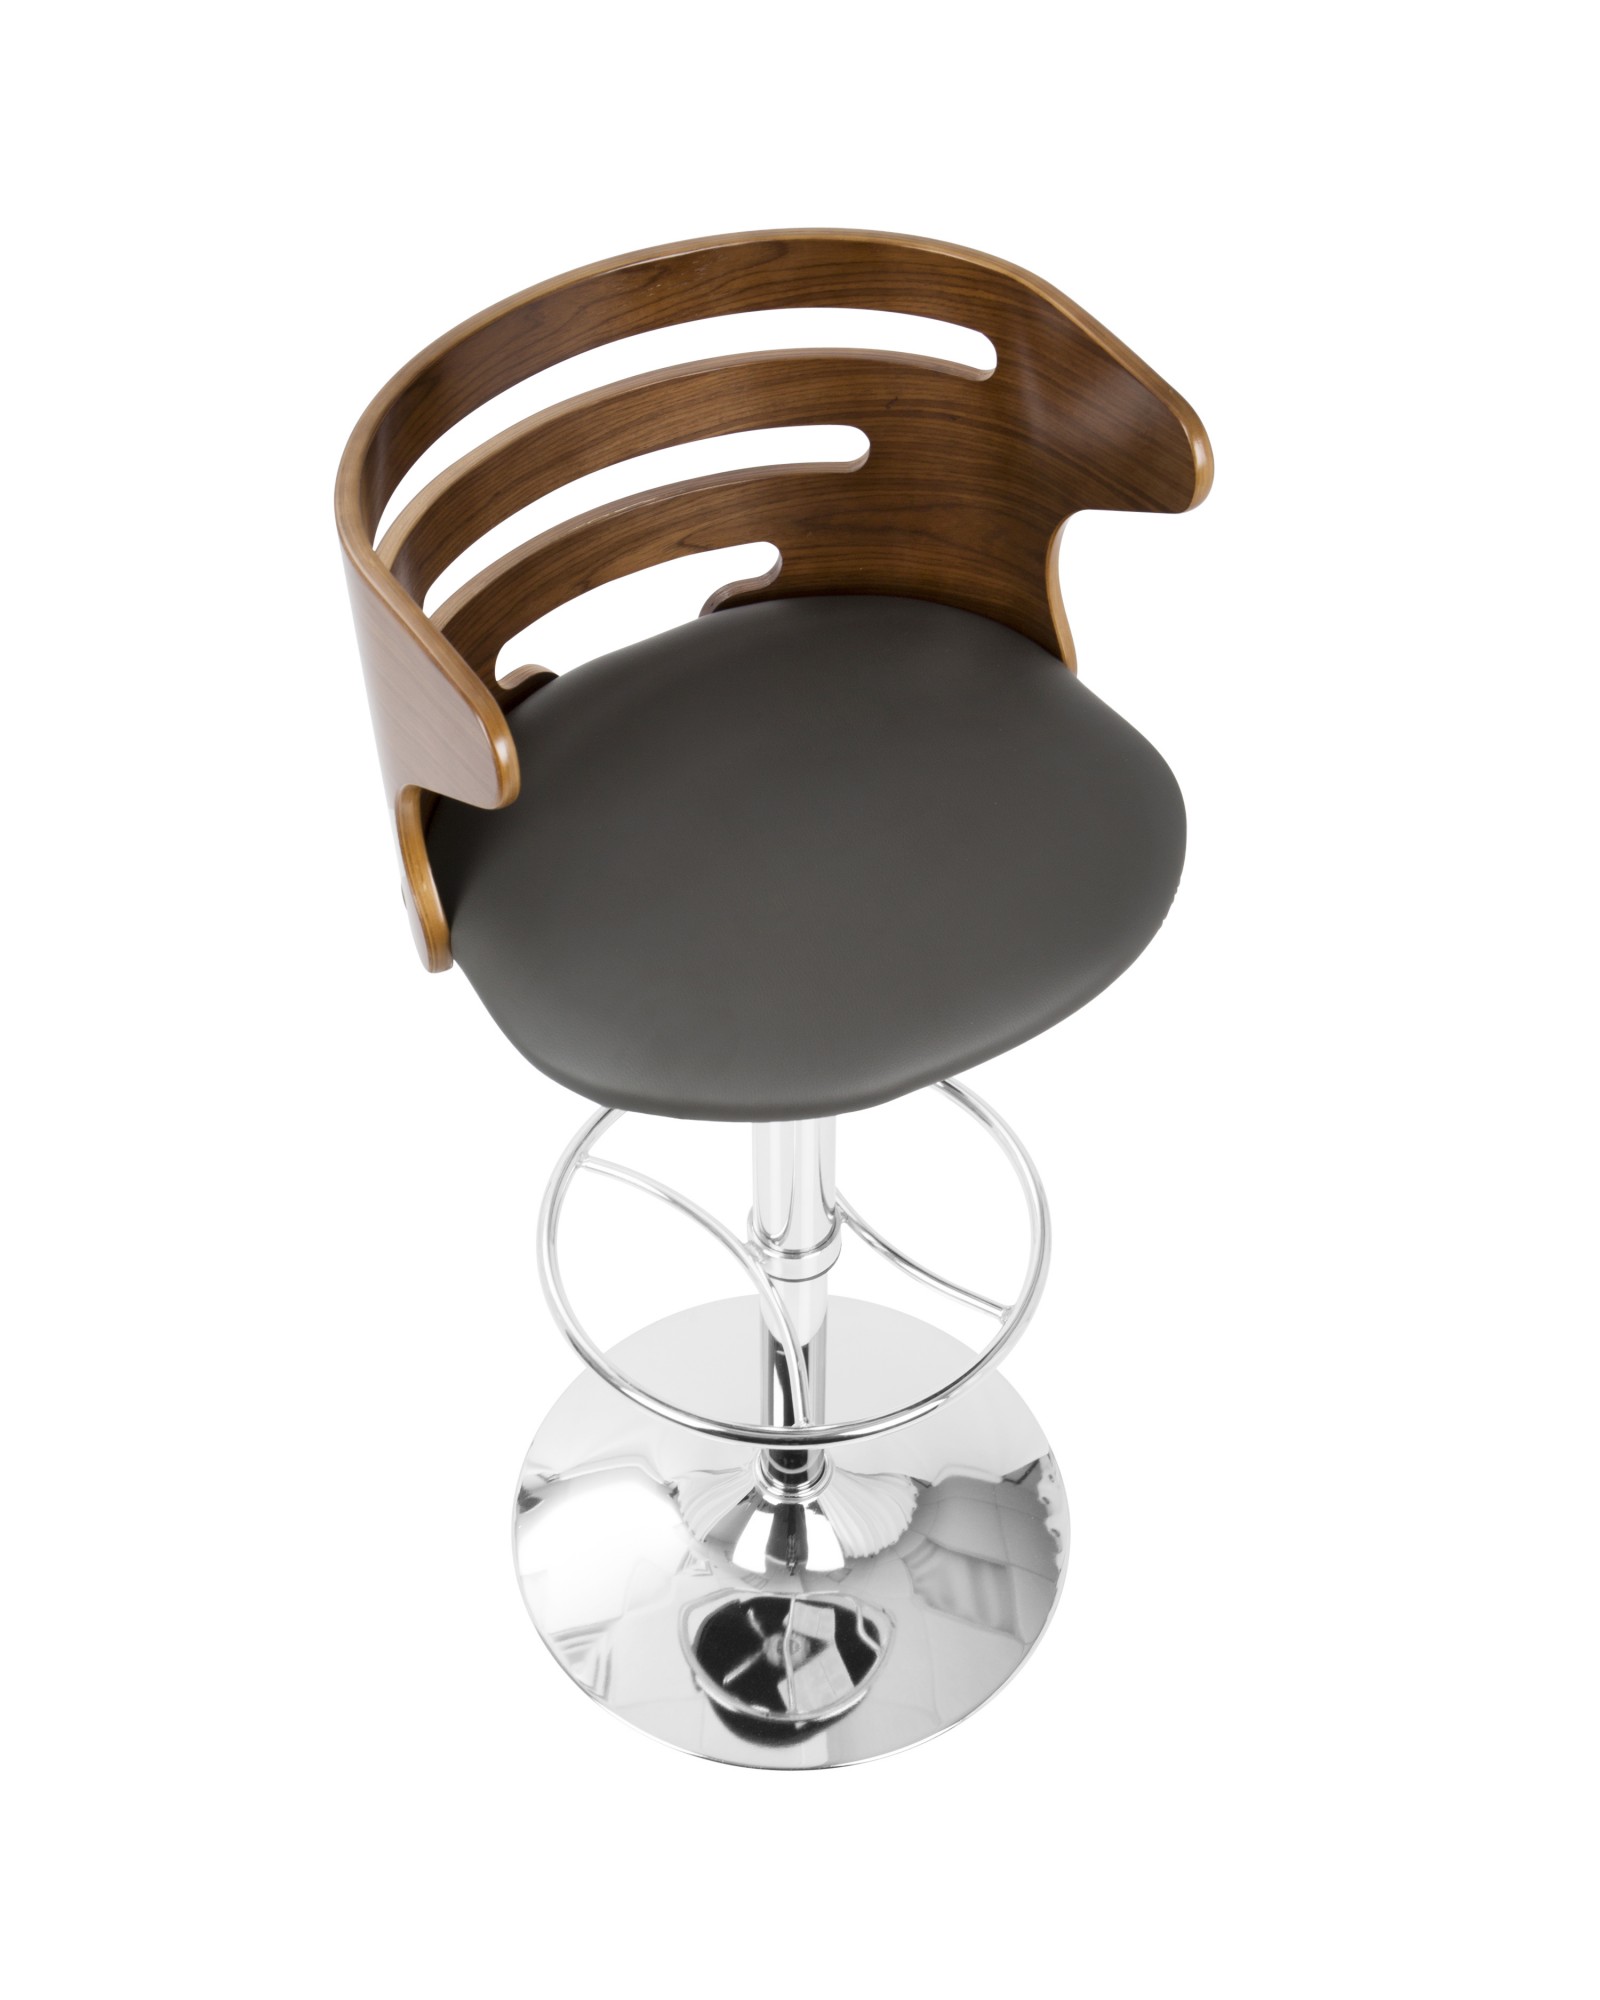 Cosi Mid-Century Modern Adjustable Barstool with Swivel in Walnut and Grey Faux Leather